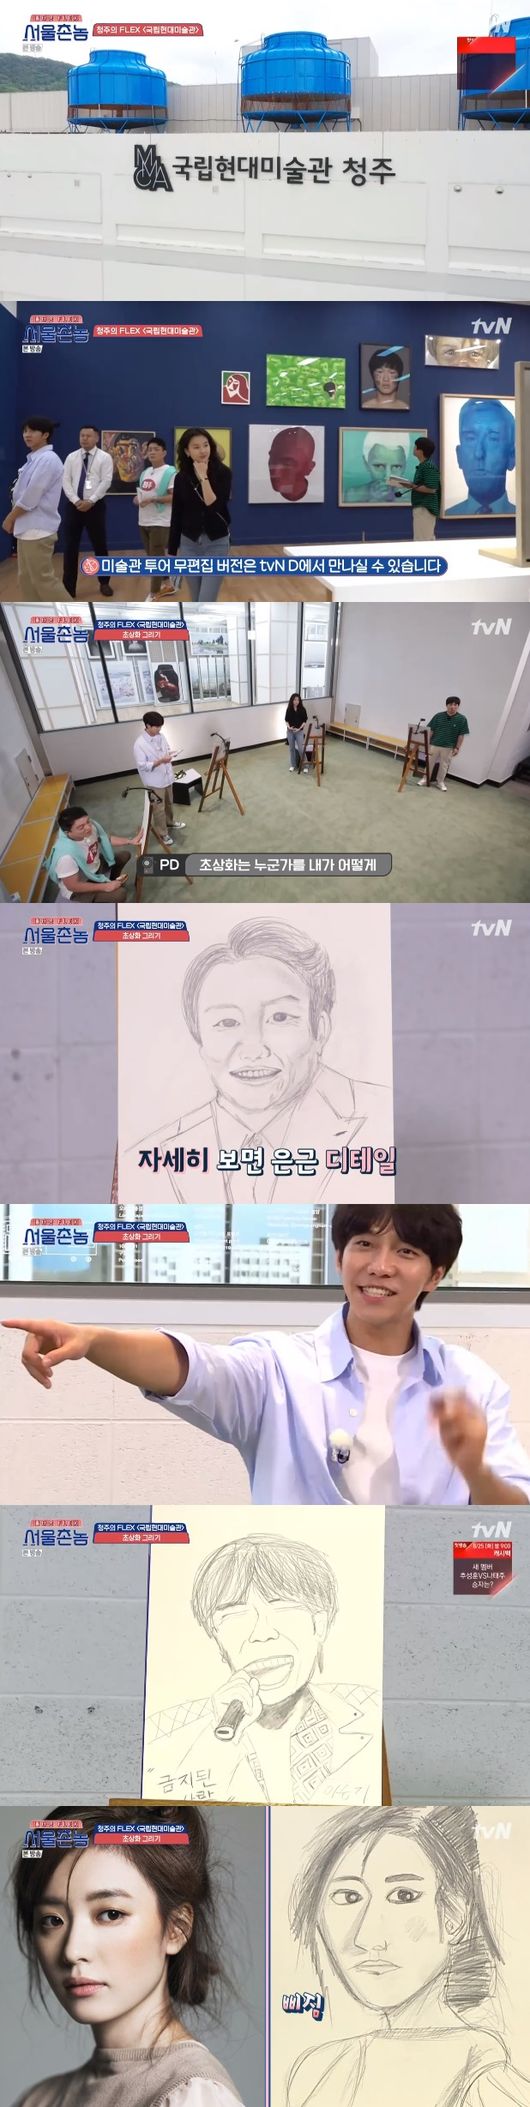 Lee Beom-soo and Han Hyo-jooo stepped up as Cheongju Broadcasting Guide.In the TVN entertainment Hometown Flex  broadcasted on the 9th, Lee Beom-soo and Han Hyo-jooo, who were the Cheongju Broadcasting guide, were drawn.Lee Seung-gi, Cha Tae-hyun and Han Hyo-jooo headed to the Seolungtang restaurant in the Cheongju Broadcasting six-way market recommended by Lee Beom-soo.Lee Beom-soo arrived in front of the store and said, I thought there was a high stairs when I was a child, but I did not.Han Hyo-jooo and Lee Beom-soo were happy to eat Seolleungtang, and the production team opened the instant fan Members Only, saying, I can not eat together.Han Hyo-jooo said, I do not seem to know me well.I do not know Dong-yi well, he said, and Lee Seung-gi laughed, saying, If there is hanbok, I will wear hanbok. The first citizen Choices Han Hyo-jooo, saying that he had no daughter, and the next citizen Choices Lee Seung-gi and then Han Hyo-jooo and Lee Beom-soo.Lee Seung-gi said, Wow, local power is scary. Then he contacted Na Young-seok Peedy from Cheongju Broadcasting and asked, When are you coming? Na Young-seok Peedy said, I have to work.Its night, he said.Then he explained the conversation of Cheongju Broadcasting people and Lee Seung-gi said, Its like Hyoju said, so everyone can meet.Its amazing, he replied, adding that the Members Only continued afterward, and the Seoul team turned around and led 5:34.Han Hyo-jooo applied lipstick, saying Im the last citizen, I have to win, and Lee Seung-gi laughed, saying Hey, stop.Fortunately, the last citizen finished Han Hyo-jooo with Choices at 5:5, and the crew said, Cheongju Broadcasting is like a city in the middle.Lets eat Seolleungtang together, and the four cheered.Since then, the four have headed to Central Park, a memorable spot recommended by Lee Beom-soo.Lee Beom-soo was thrilled to say, It seems to be coming here in 30 years. He recalled the days when he painted in front of Cheongnyeonggak in the first three years and soon released the pictures he painted in those days.The four then ate a famous hodok at Cheongju Broadcasting and Han Hyo-joo said, No one knows this place at Cheongju Broadcasting.After eating hodok, he moved to the iron bar. Lee Beom-soo and Han Hyo-jooo explained, Its a meeting place.Upon arriving at the iron bridge, Han Hyo-jooo explained what he had studied and Lee Seung-gi praised him for studying properly.This is where we came from on shooting for a night and two days, Cha Tae-hyun said, while the production team said, The iron millennium is a thousand years old; people gather here.Han Hyo-jooo said, Not only this, but there are many artifacts here; the place where the Jikjimseng was found is the first printed copy of the metal type. 1377. This is a great city.Then Lee Seung-gi said, Youre going to be a public relations ambassador.Lee Beom-soo said, When I was worried about my career, I asked you to go to the theater and film department. Thank you very much.Thanks to you, and my friend said, I gave you direction, but you were through it. As the two peoples calls grew longer, Han Hyo-jooo said, Cheongju Broadcasting people have a long call. Lee Seung-gi said, Can I refill that coffee?Cheongju Broadcasting The more you know, the more attractive you are. Then, I headed to the Cheongju Broadcasting Museum of the National Museum of Contemporary Art recommended by Han Hyo-jooo.Han Hyo-jooo said, I do not know, but the energy of the museum is so good, its been too long. The four admired the work.During the art appreciation, the crew suggested drawing portraits and the four seriously painted after Choices the grille.